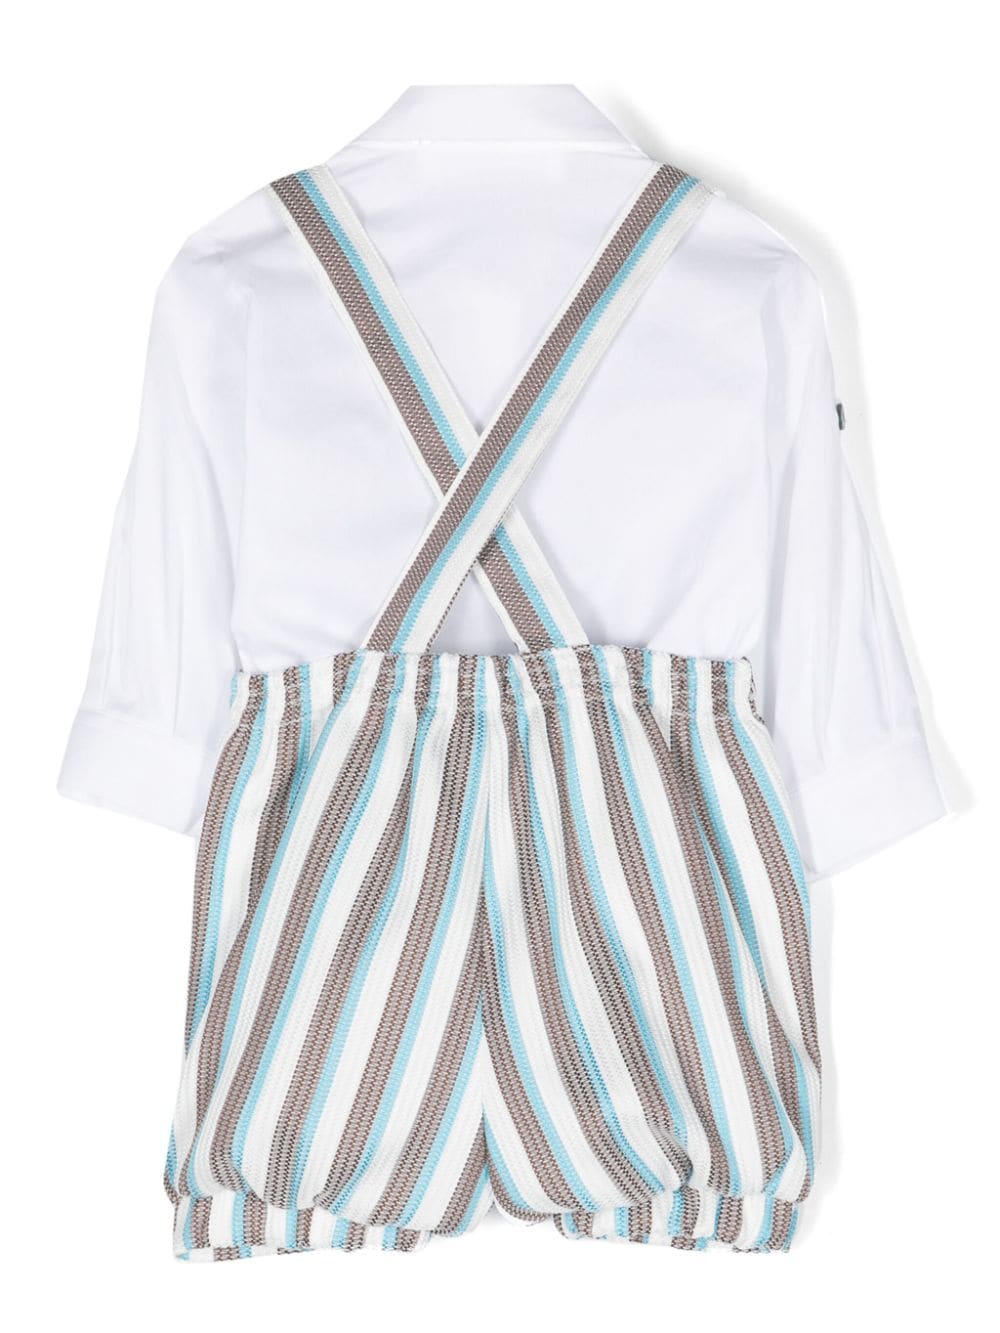 STRIPED BUTTONED SHORTS SET